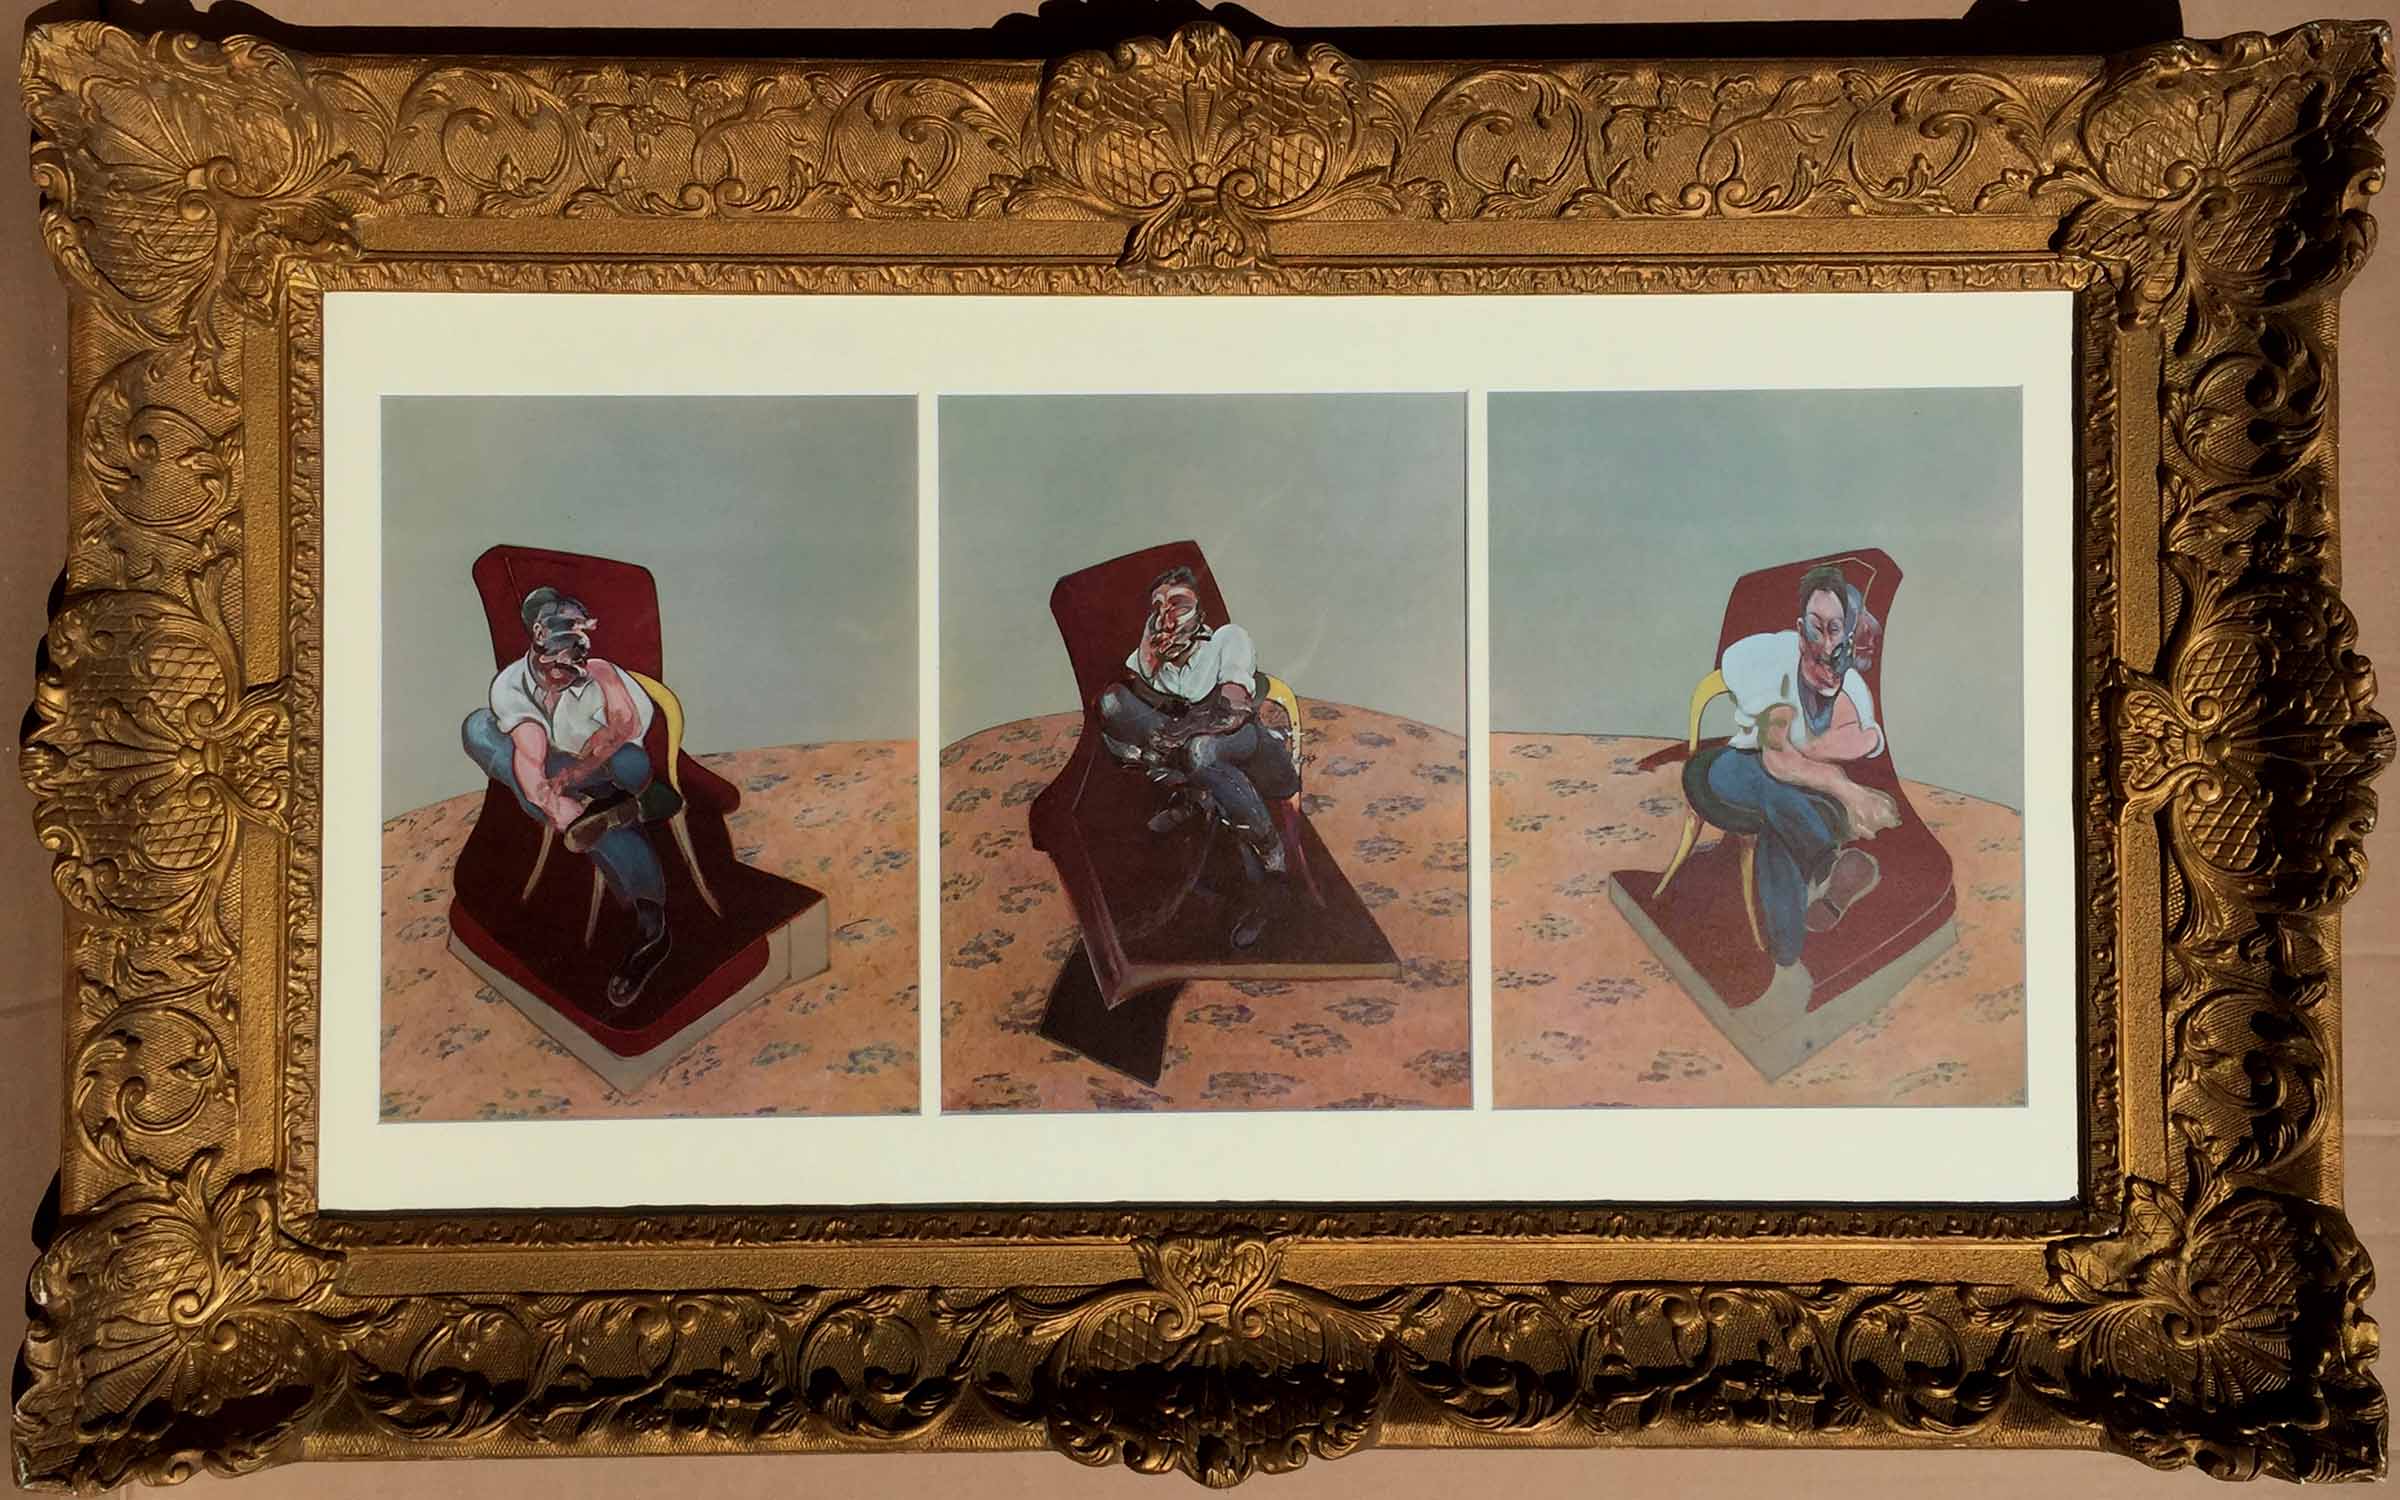 FRANCIS BACON 'Triptych Portrait of George Dyer', 1964, lithograph, 35cm x 80cm, framed and glazed.